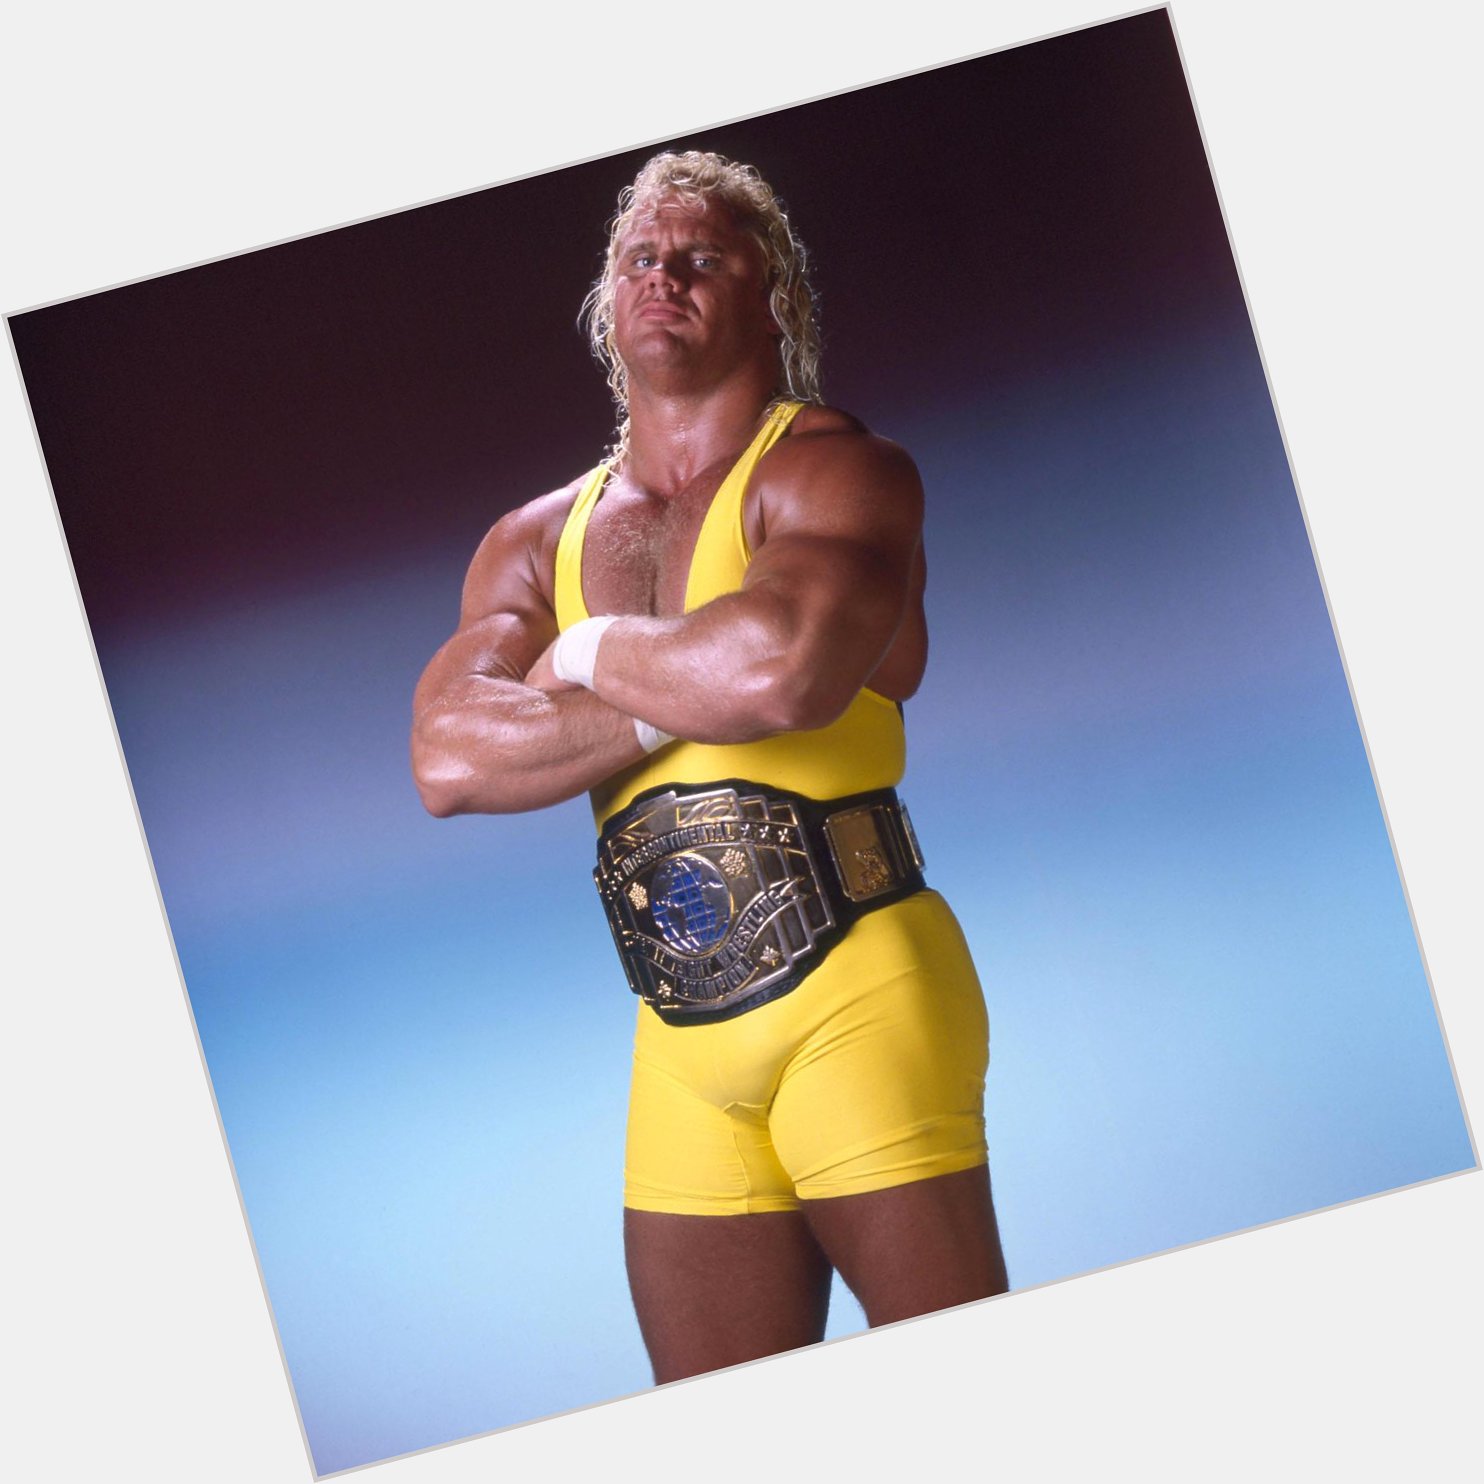 Today we remember a man who was nothing short of perfect. Happy birthday to Curt Hennig. 